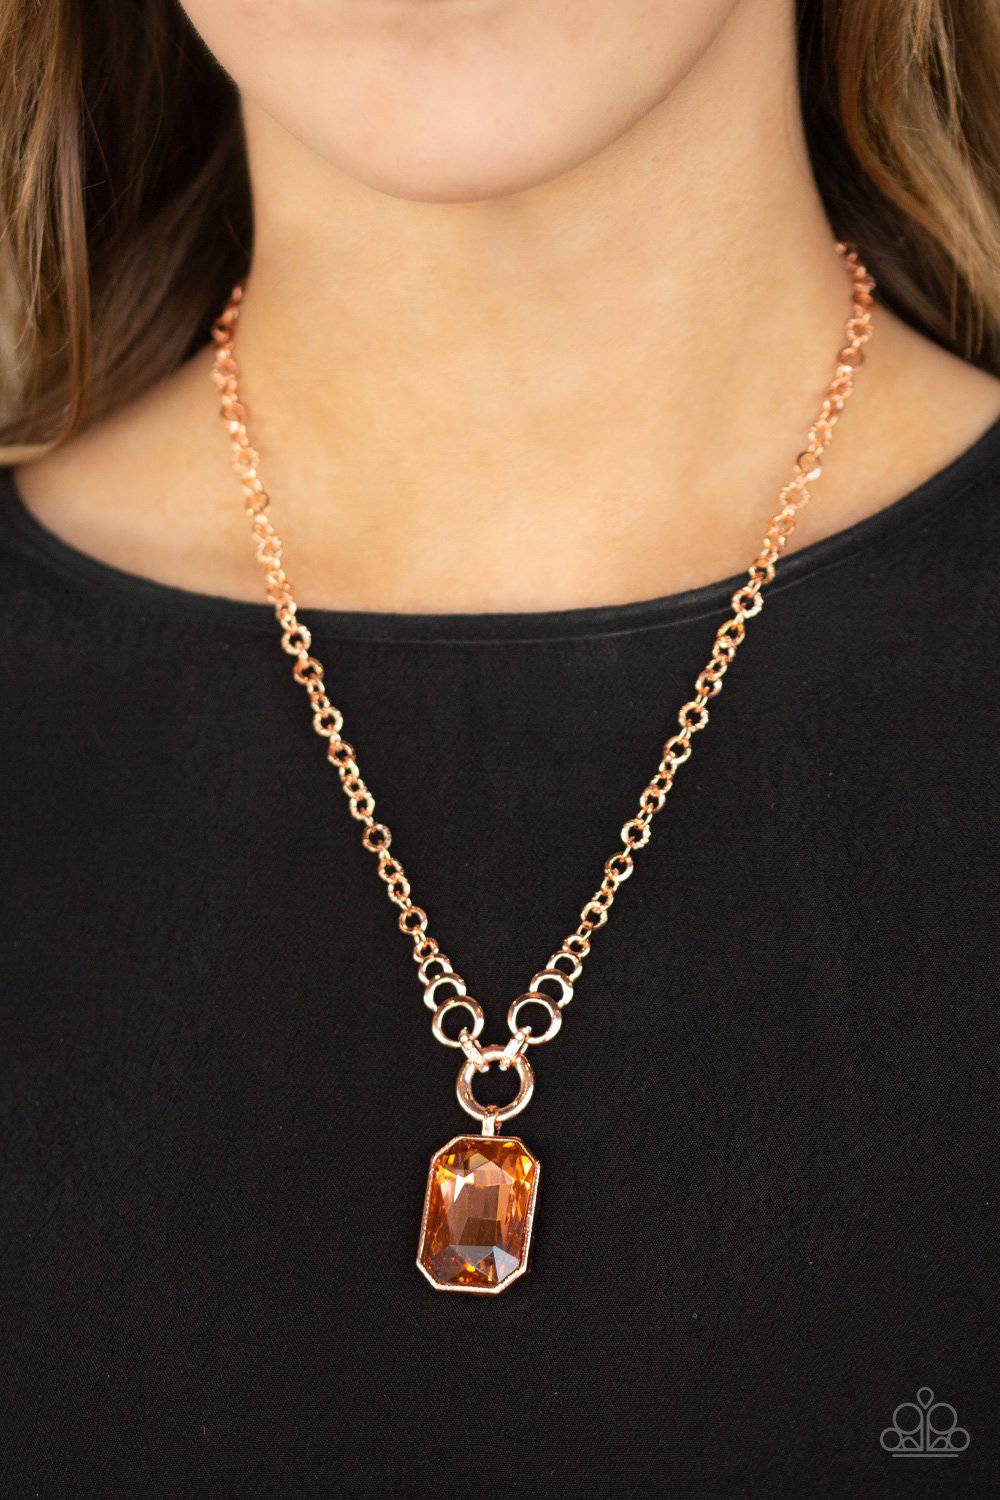 Queen Bling - Copper Bling Necklace - Paparazzi Accessories - GlaMarous Titi Jewels